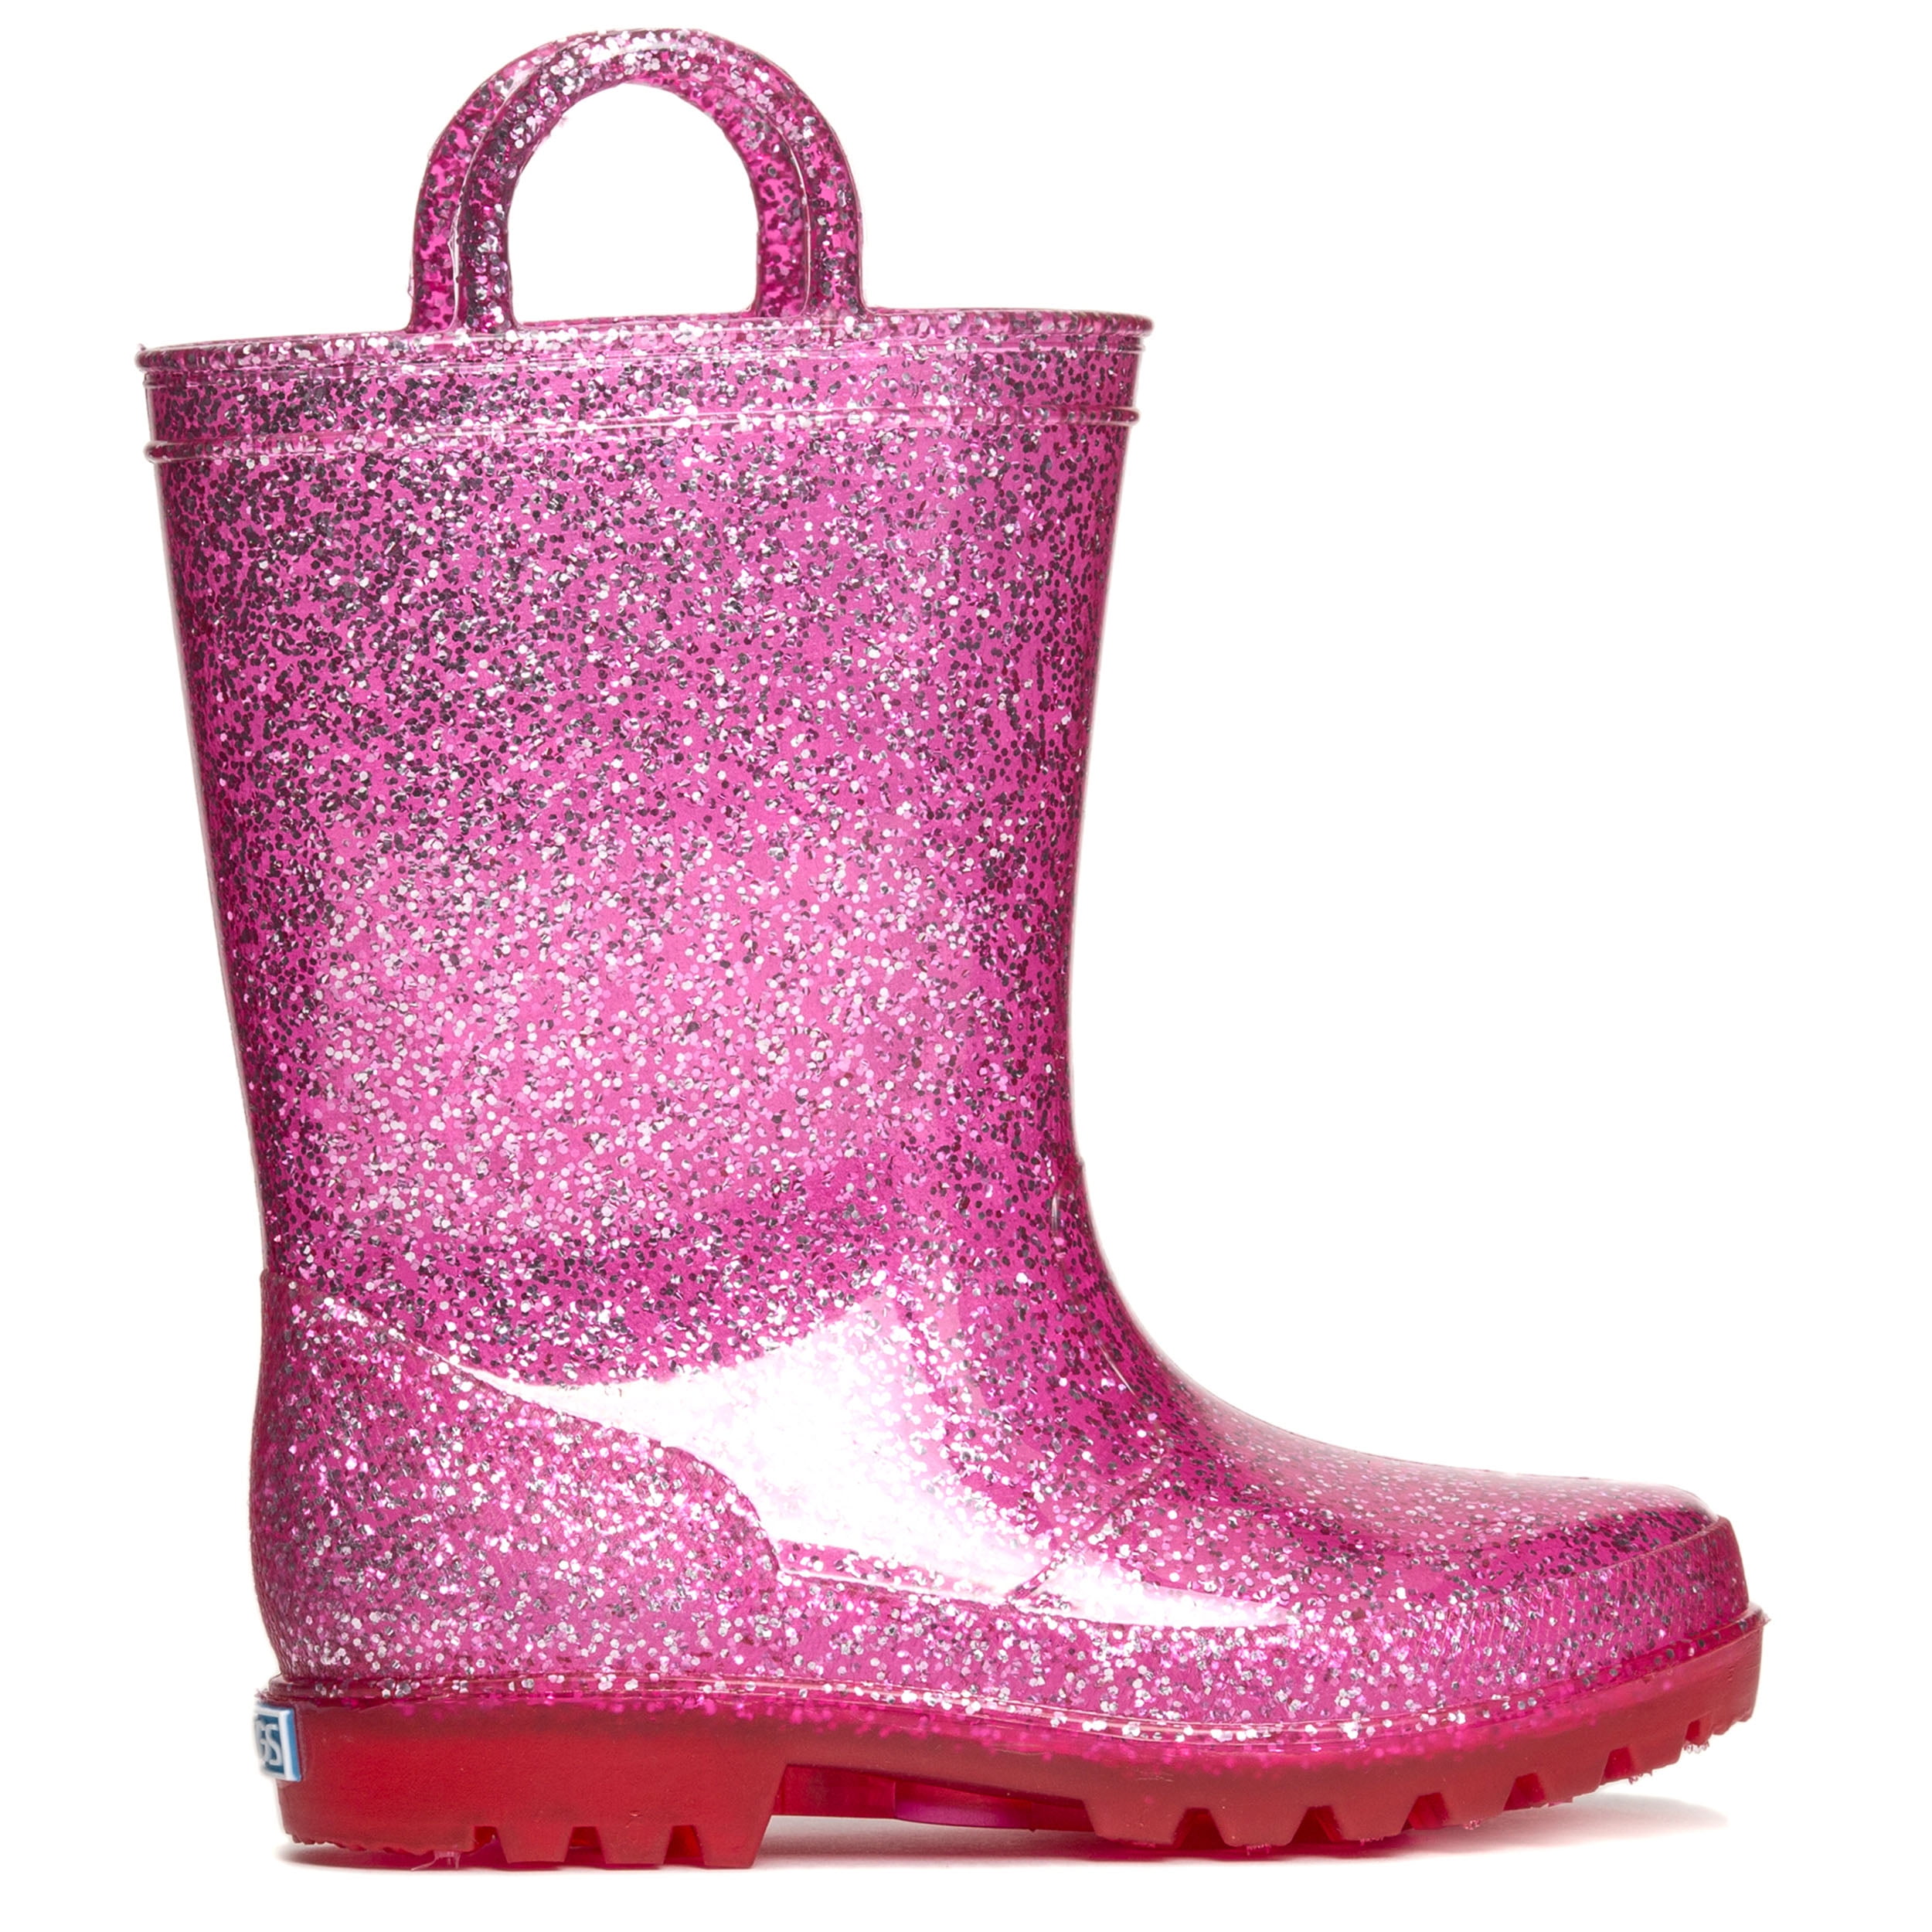 ZOOGS - ZOOGS Kids Glitter Rain Boots for Girls and Toddlers Hot Pink ...